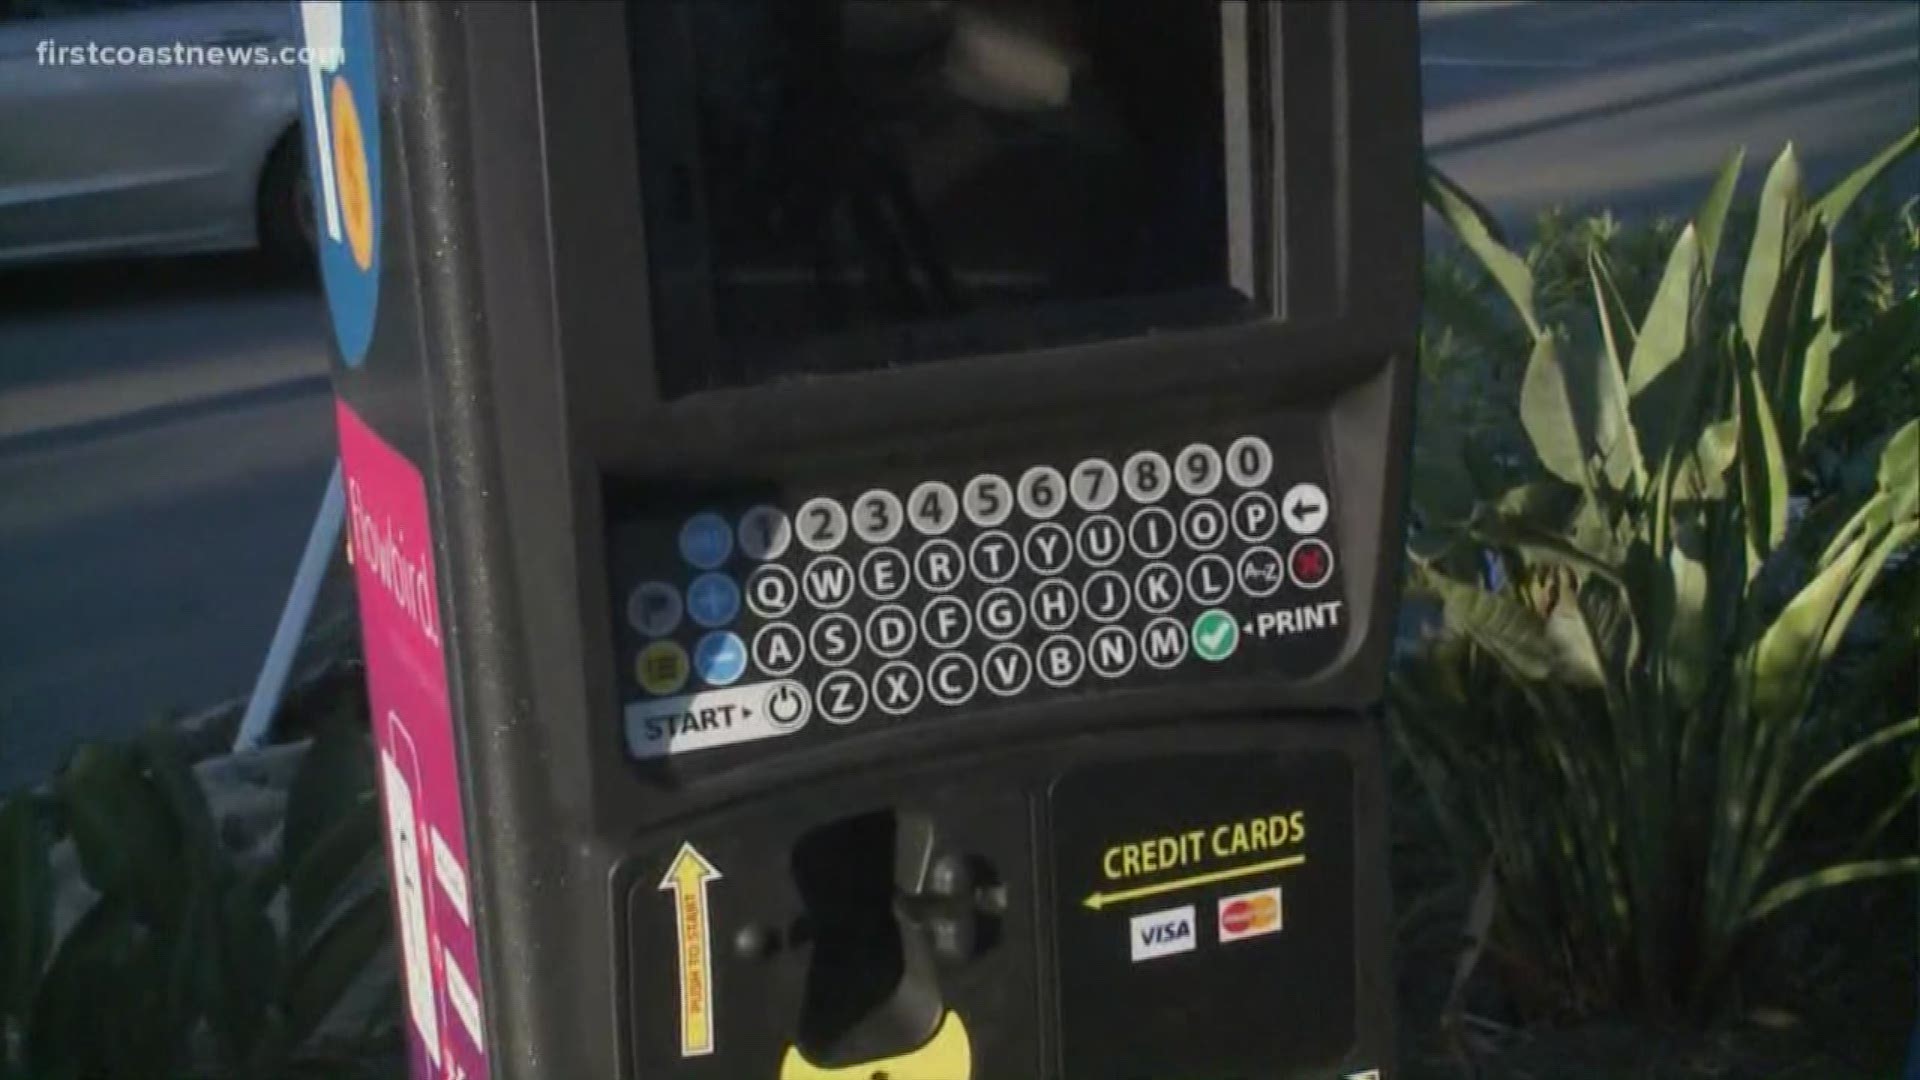 Atlantic Beach residents expecting a promised 50 percent discount are learning it's delayed due to a software malfunction at the brand new parking kiosks.